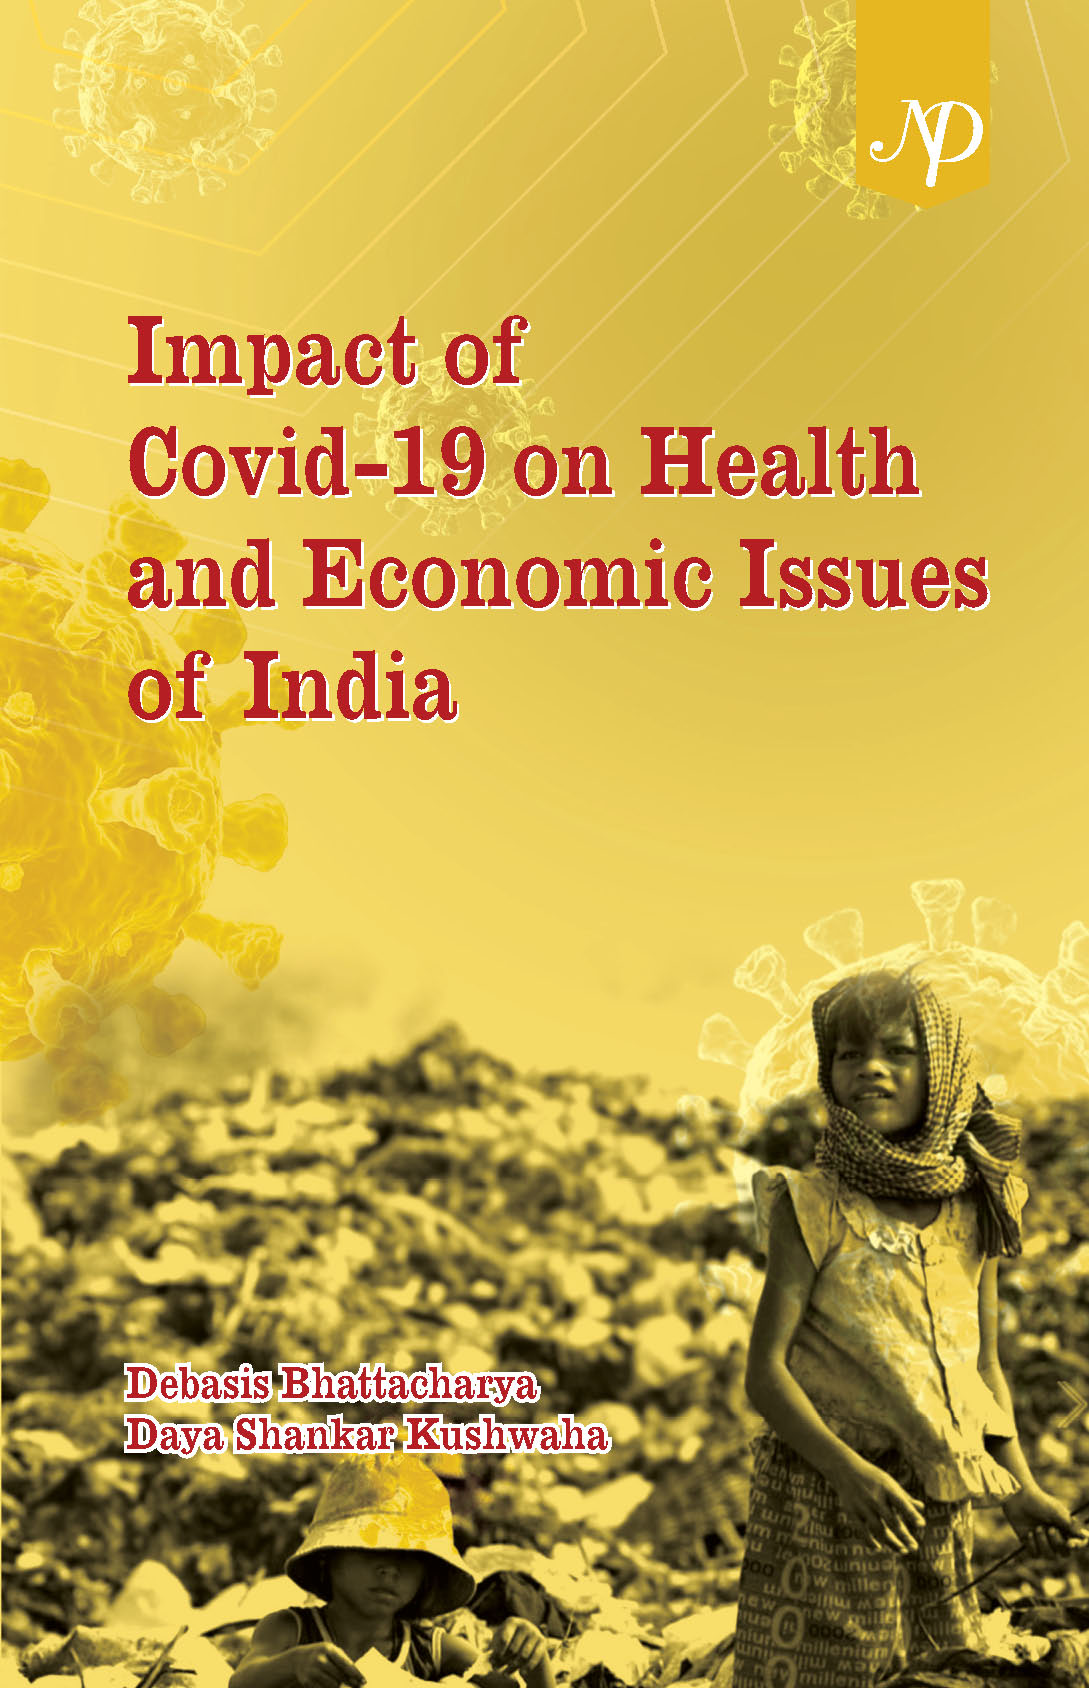 Impact of Covid-19 on Health and Economic Issues of India Cover.jpg